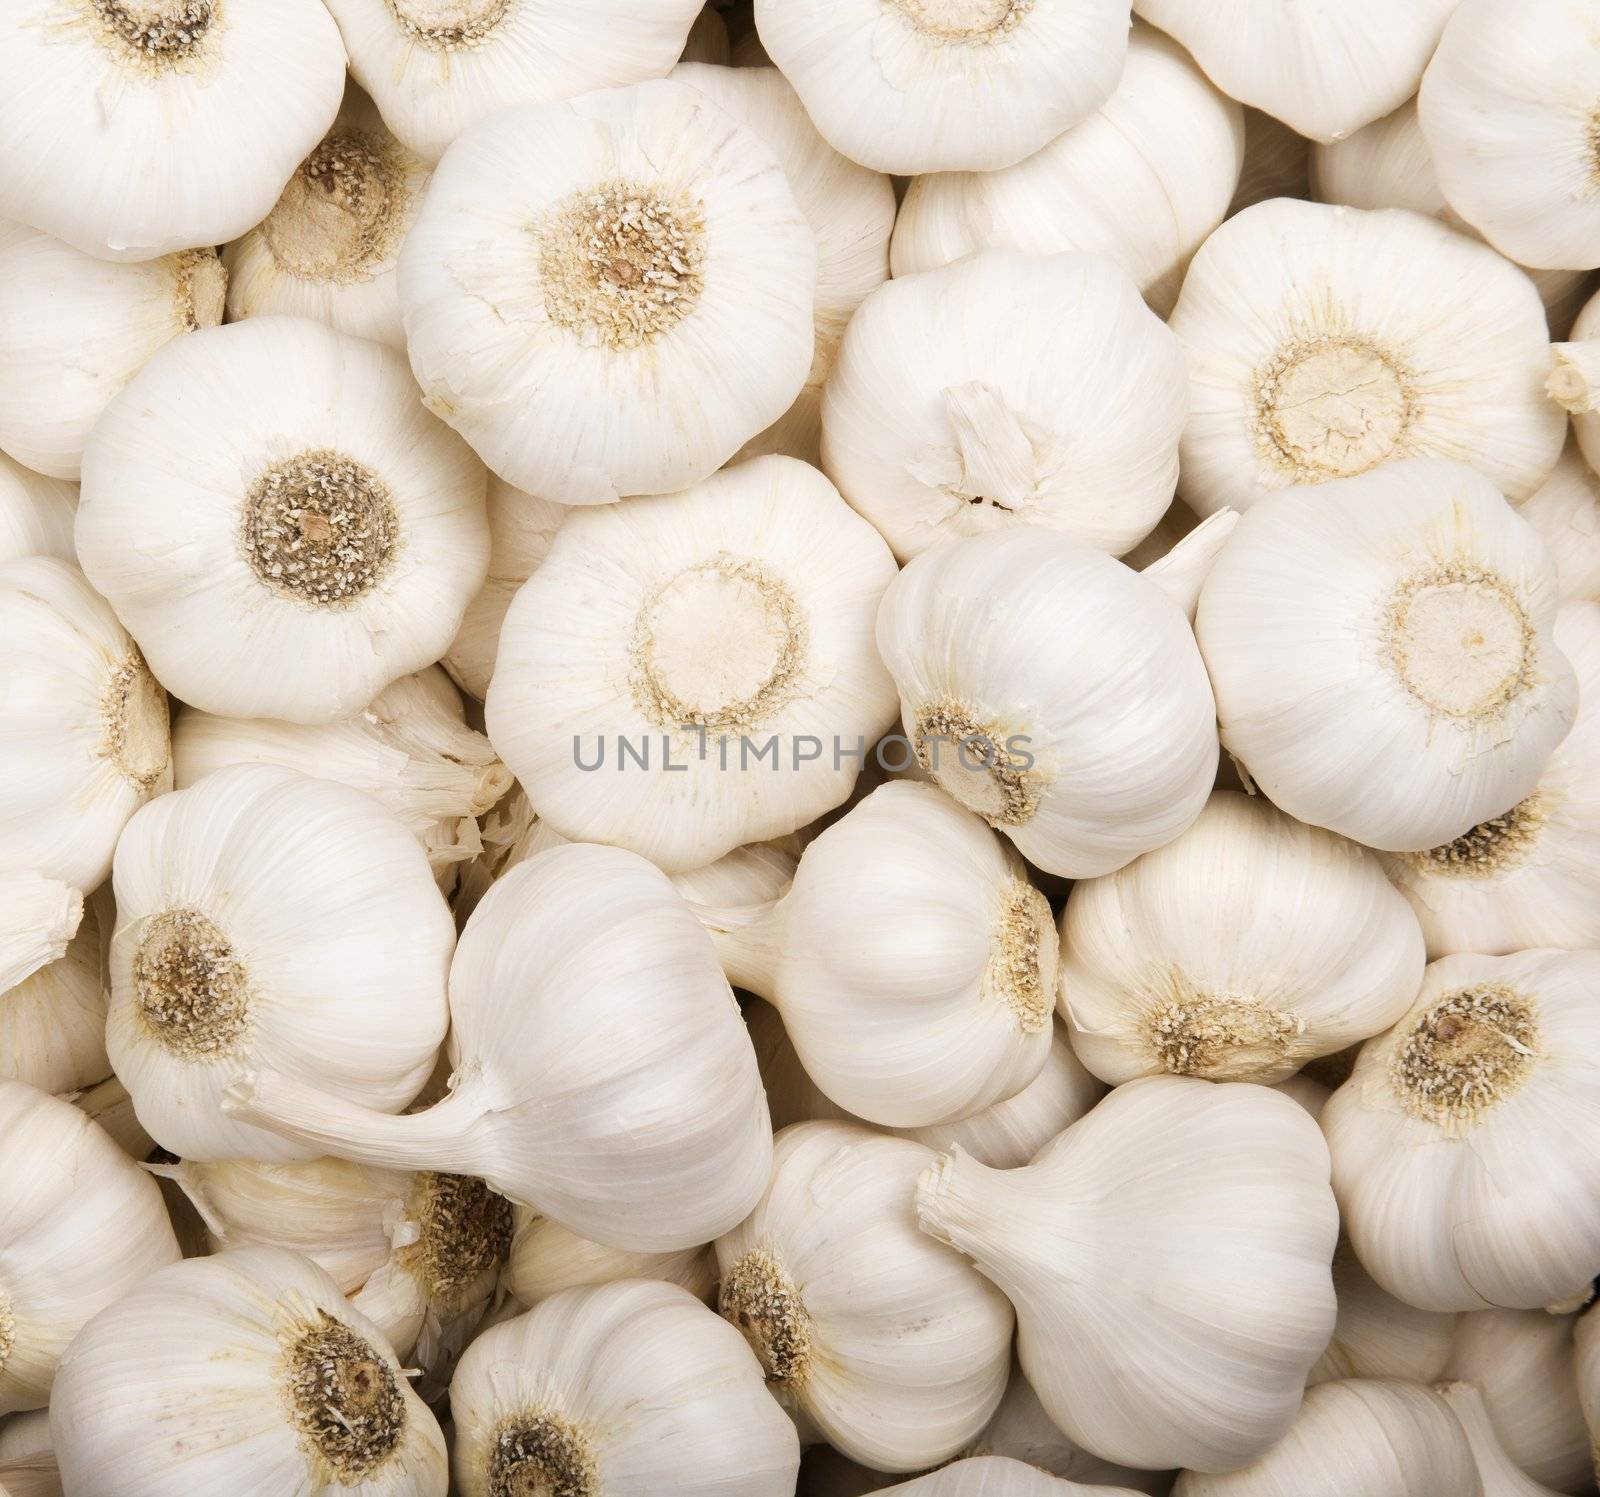 Garlic in a pile filling the frame